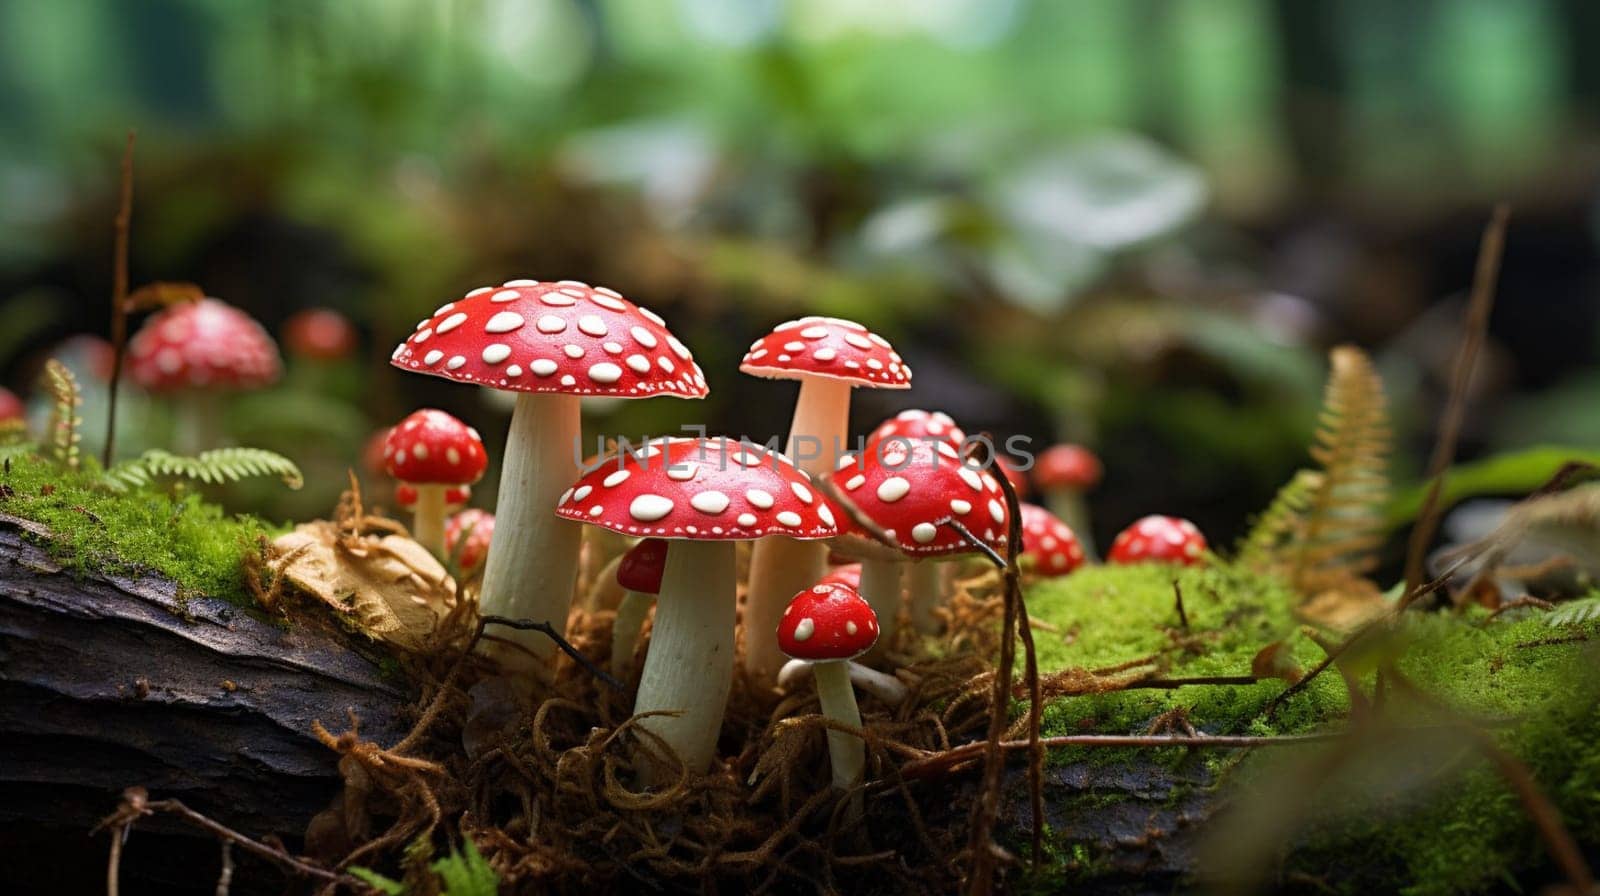 Red toadstools with white spots on mossy forest floor. High quality photo